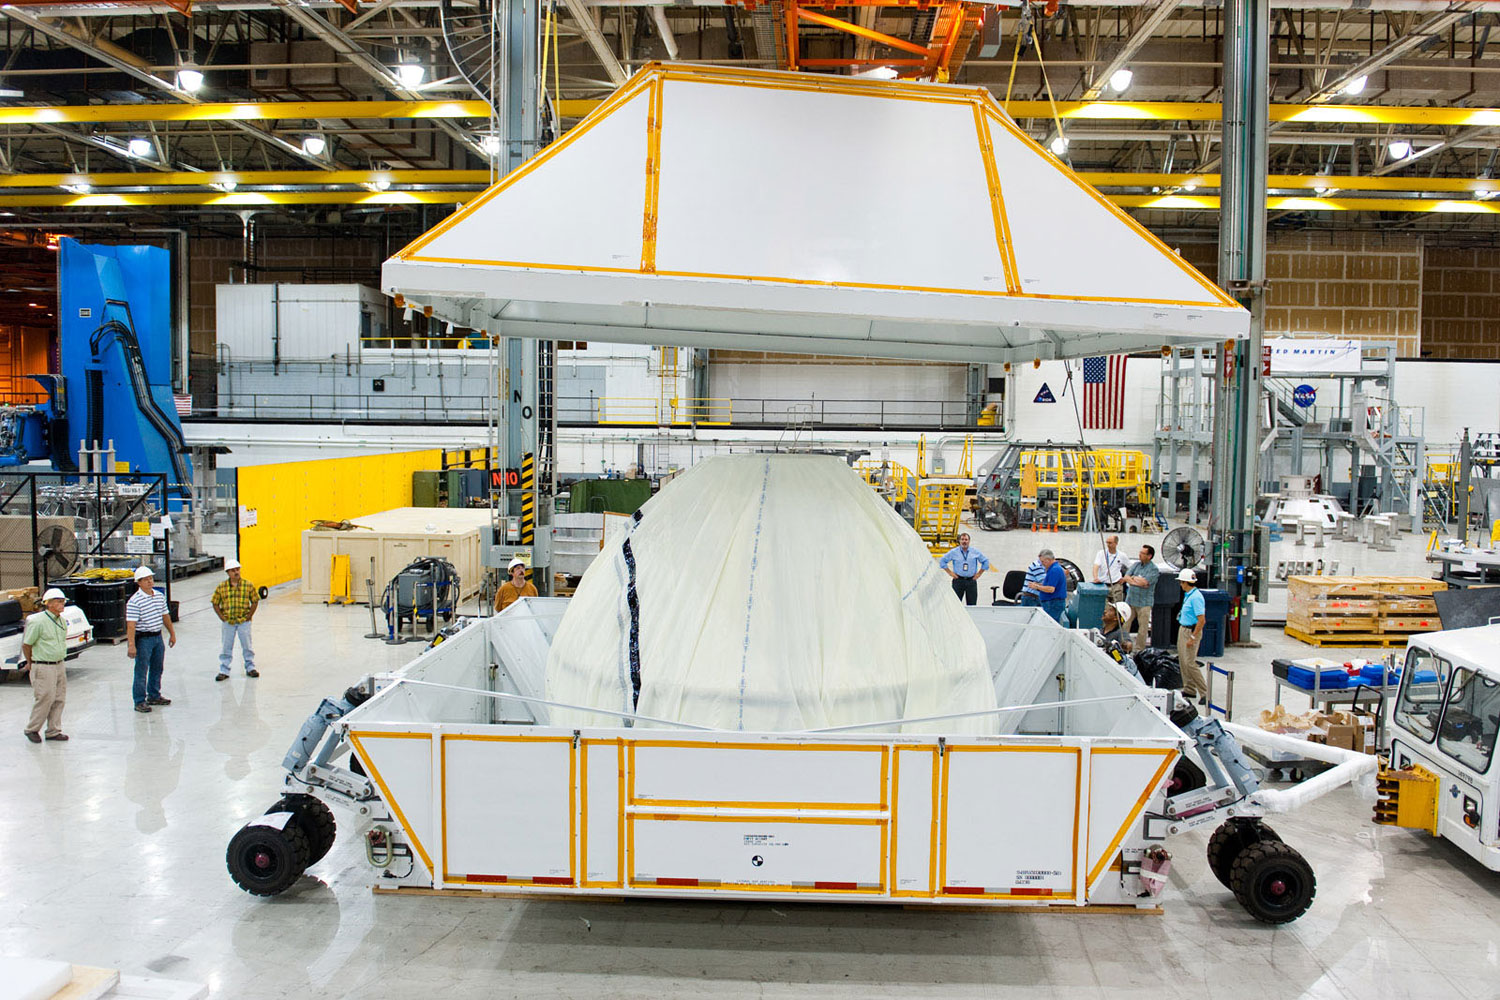 At NASA’s Michoud Assembly Facility in Louisiana, the first space-bound Orion capsule is packed up for shipment to the Kennedy Space Center for final processing and outfitting.